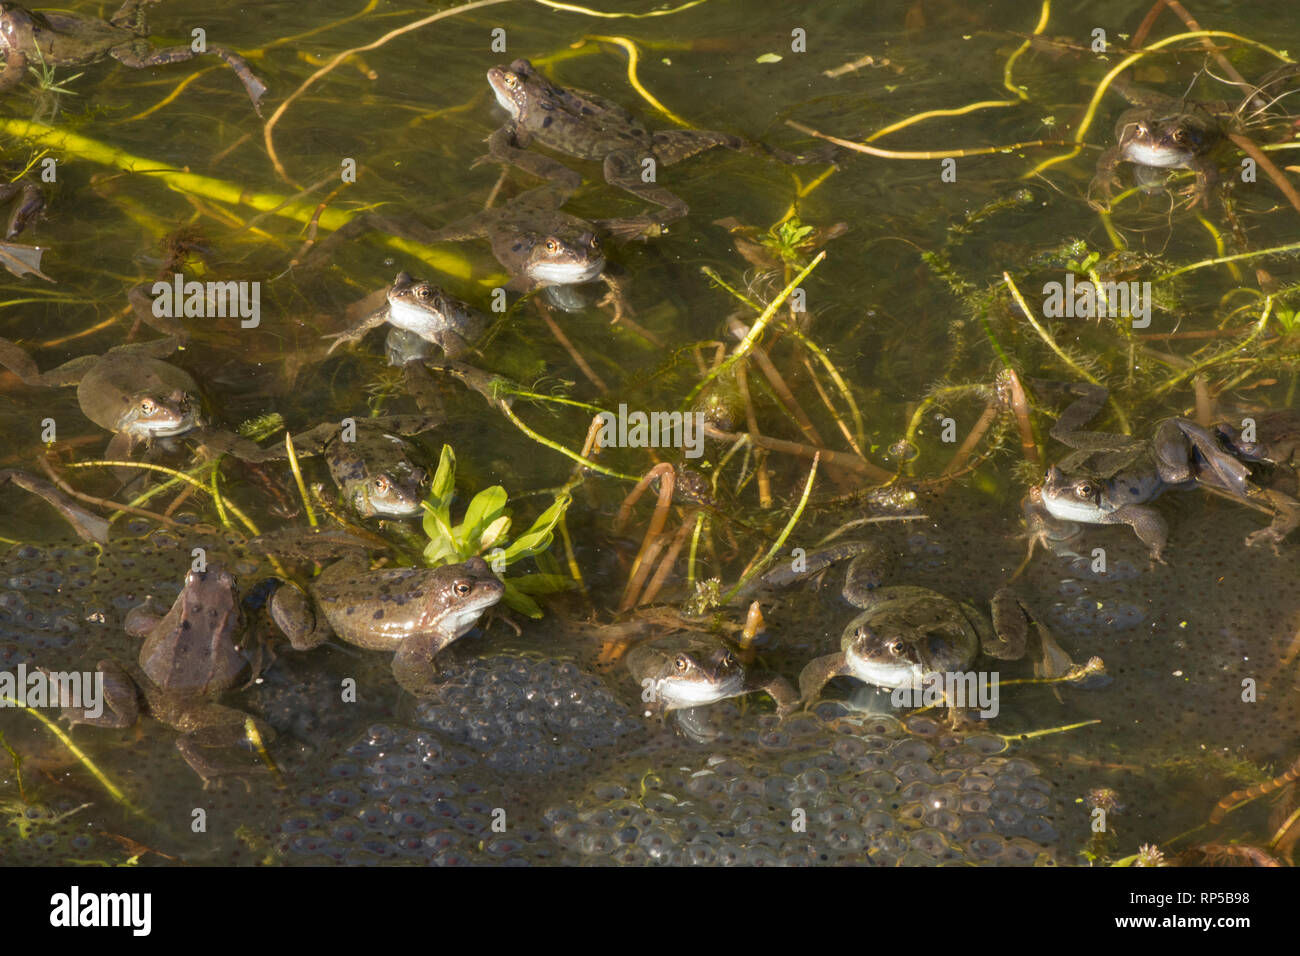 Common Frog, Rana temporaria, many males waiting on frog spawn in breeding pond for females to arrive for spawning, February, garden Stock Photo